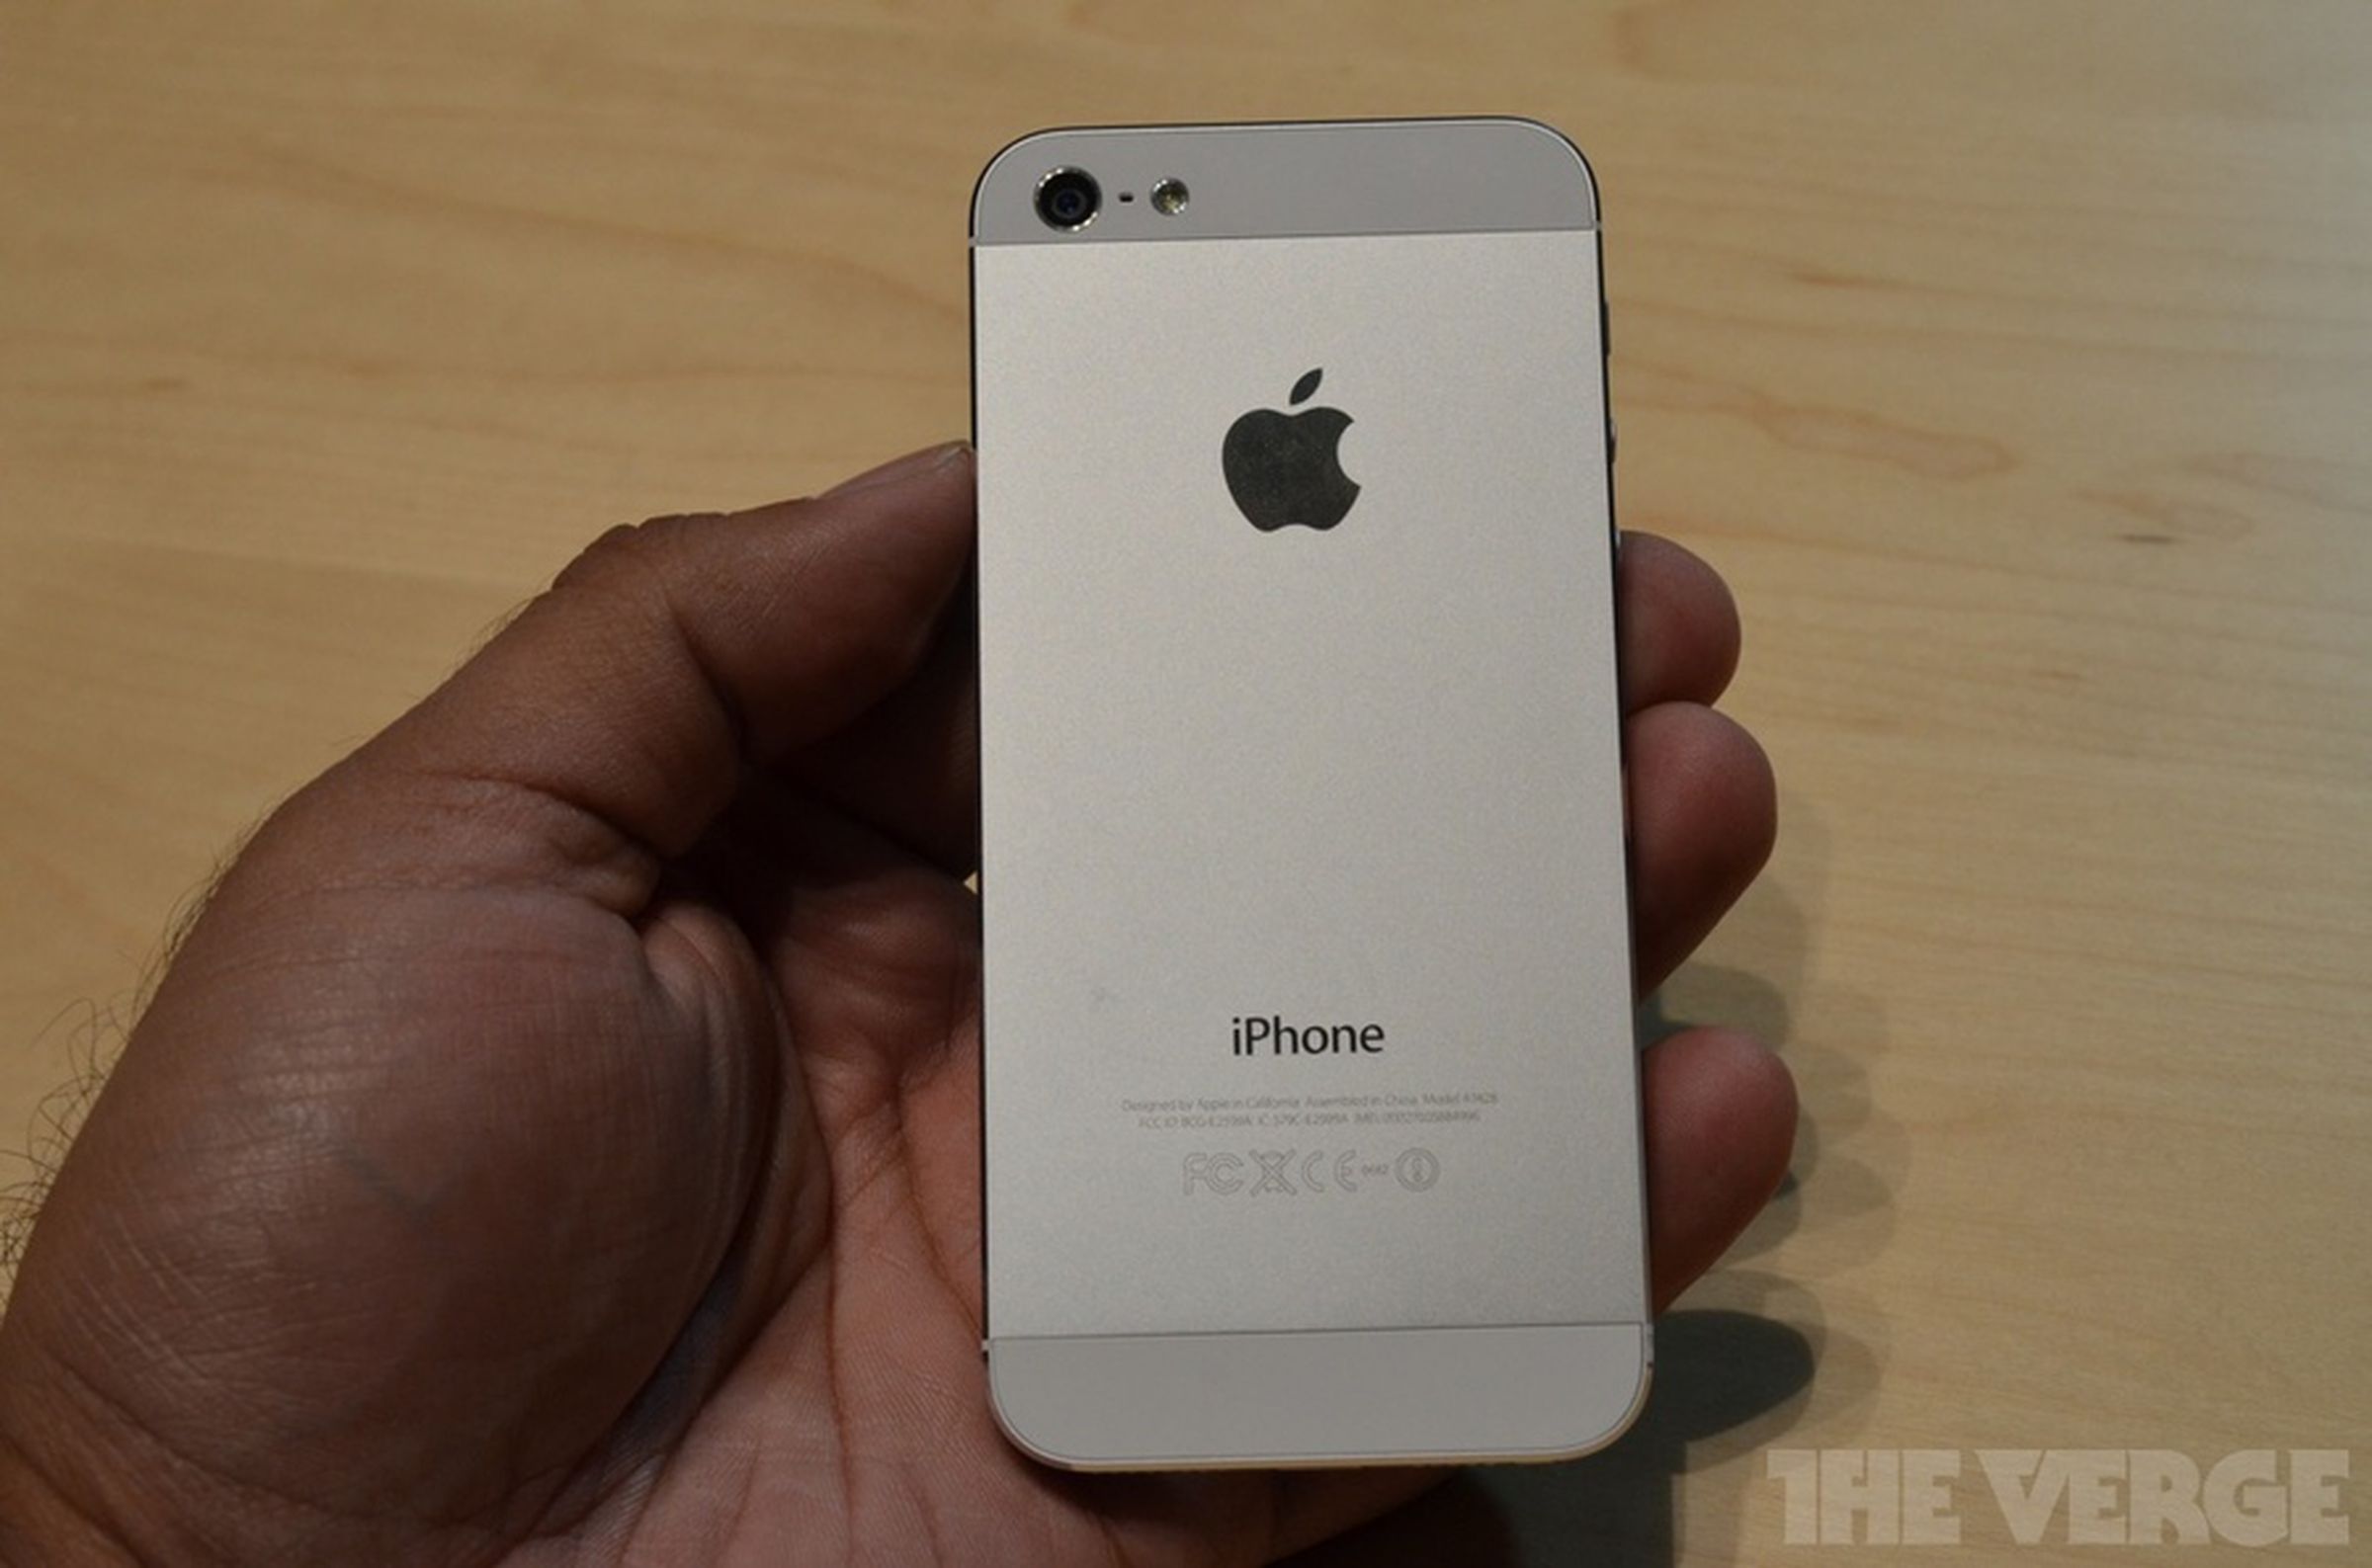 iPhone 5 hands-on photos